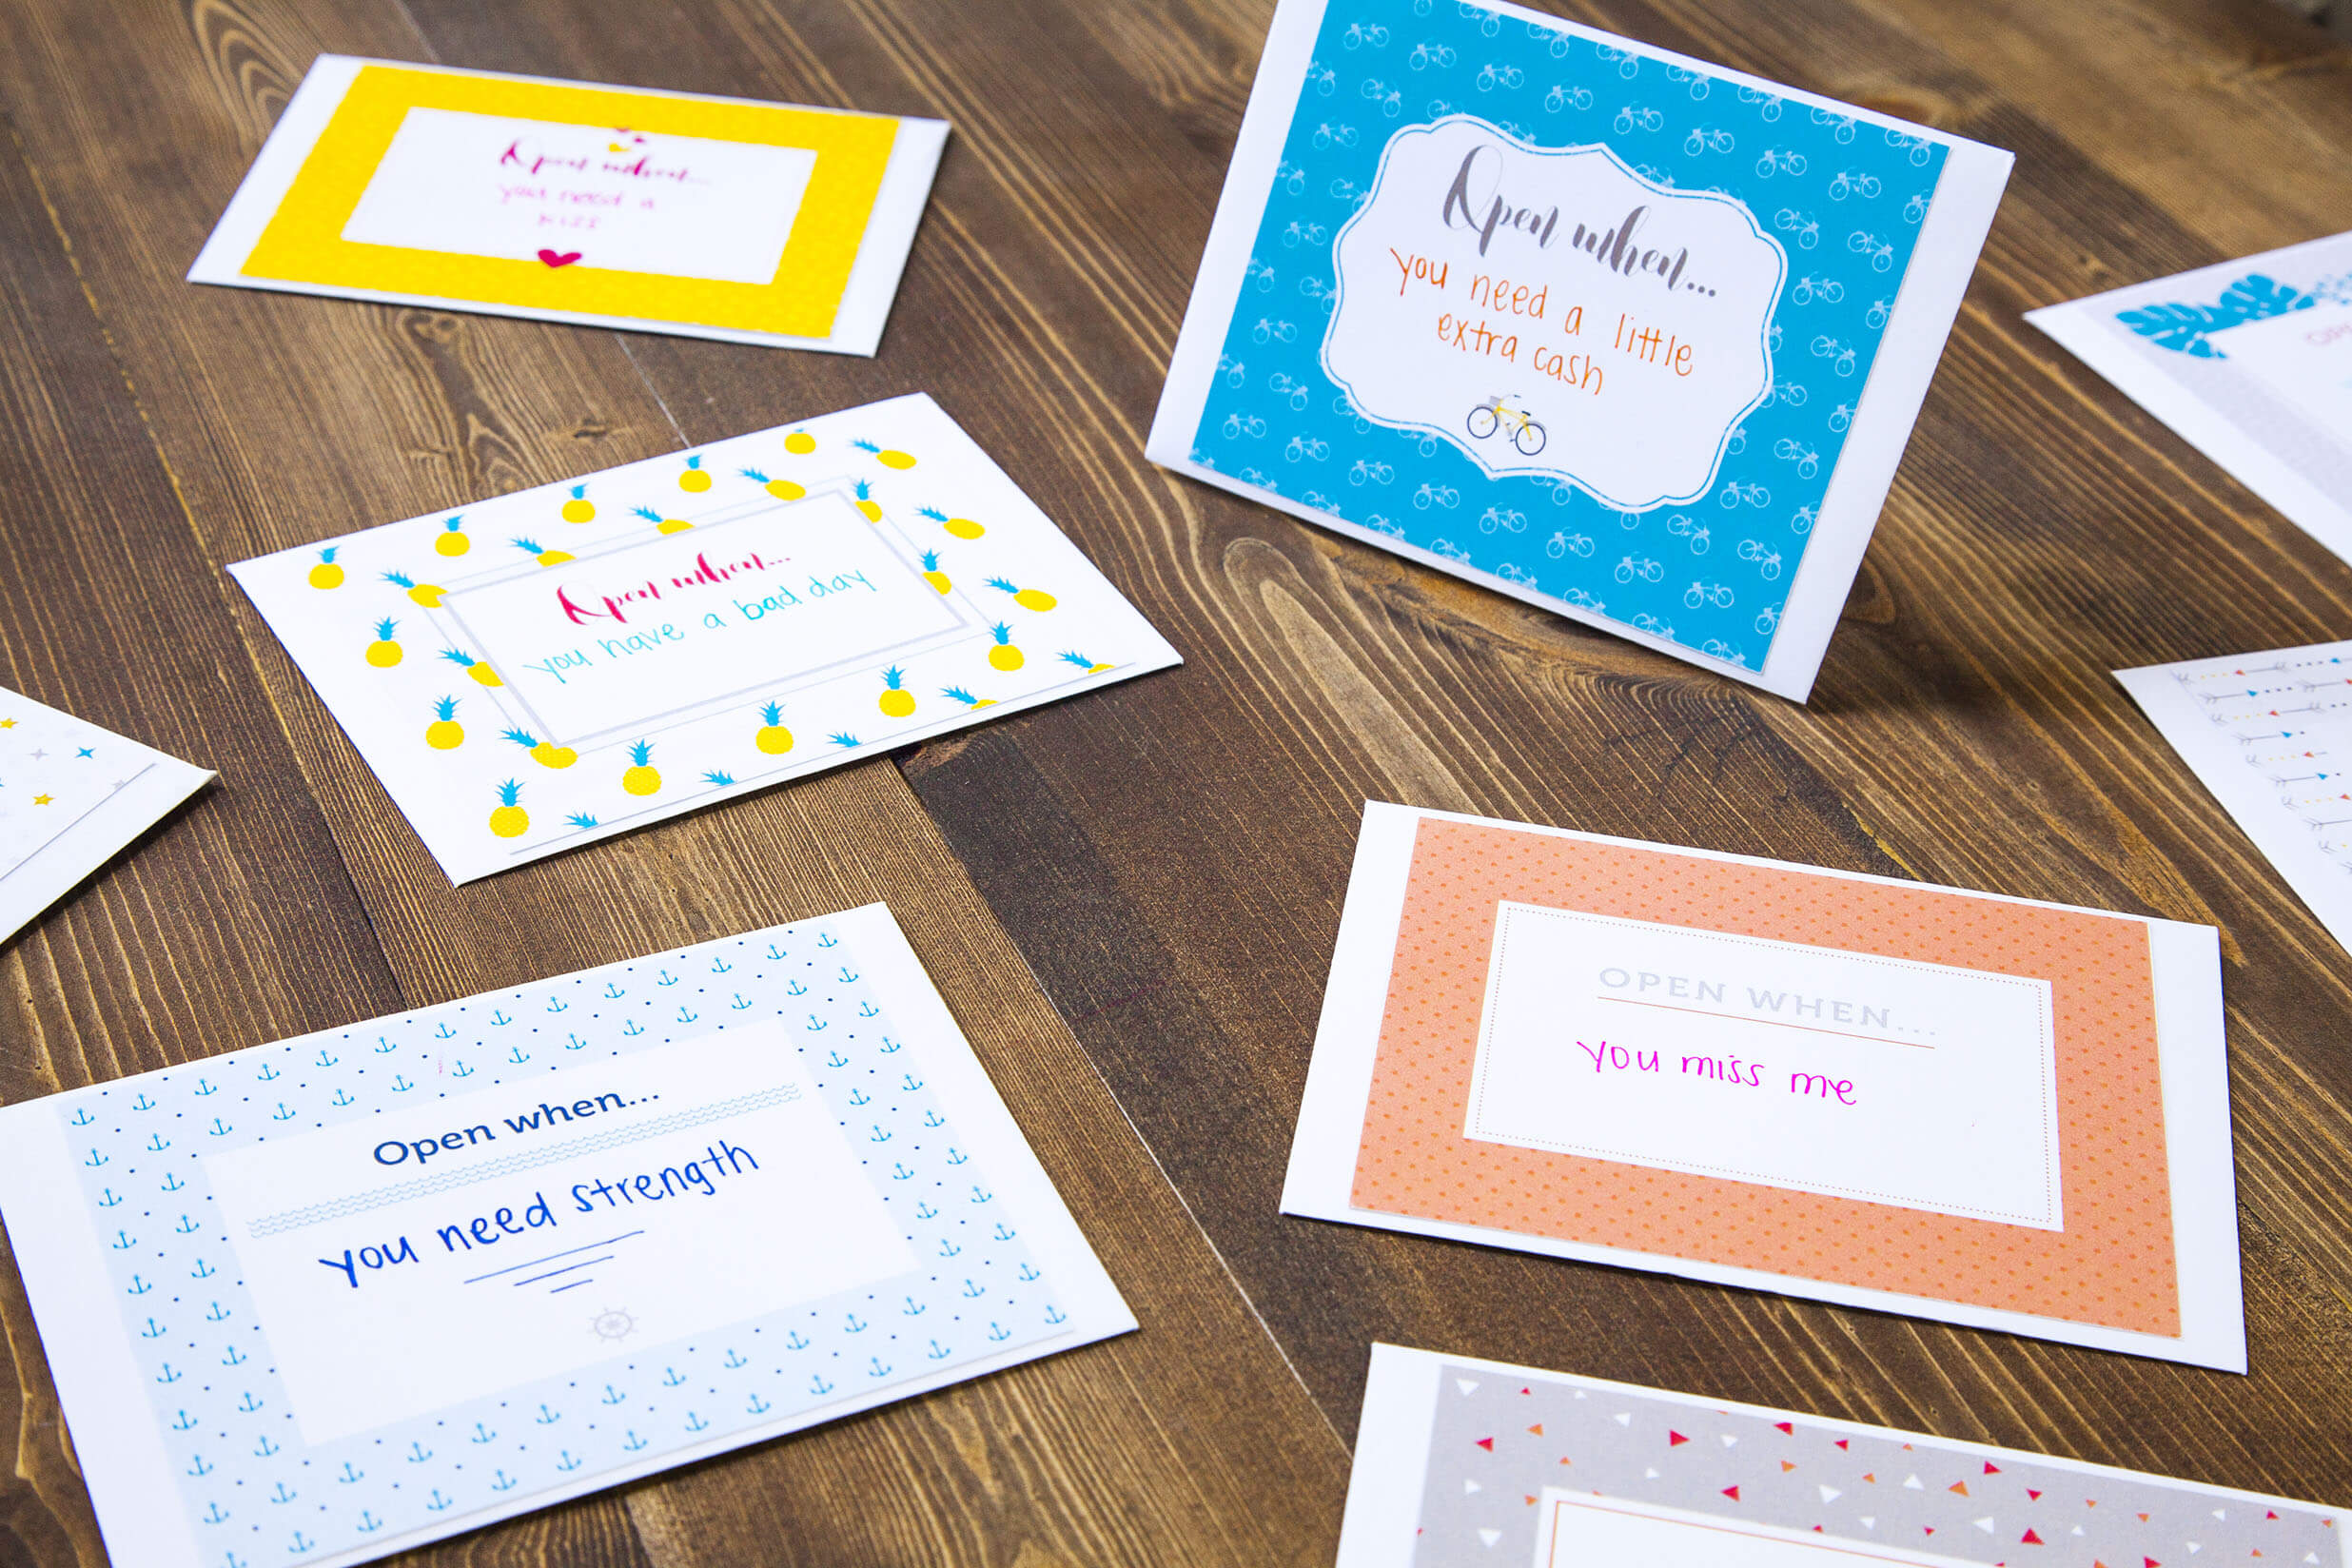 Open When Letters: 280 Ideas + Printables – Shari's Berries Blog Within 52 Reasons Why I Love You Cards Templates Free